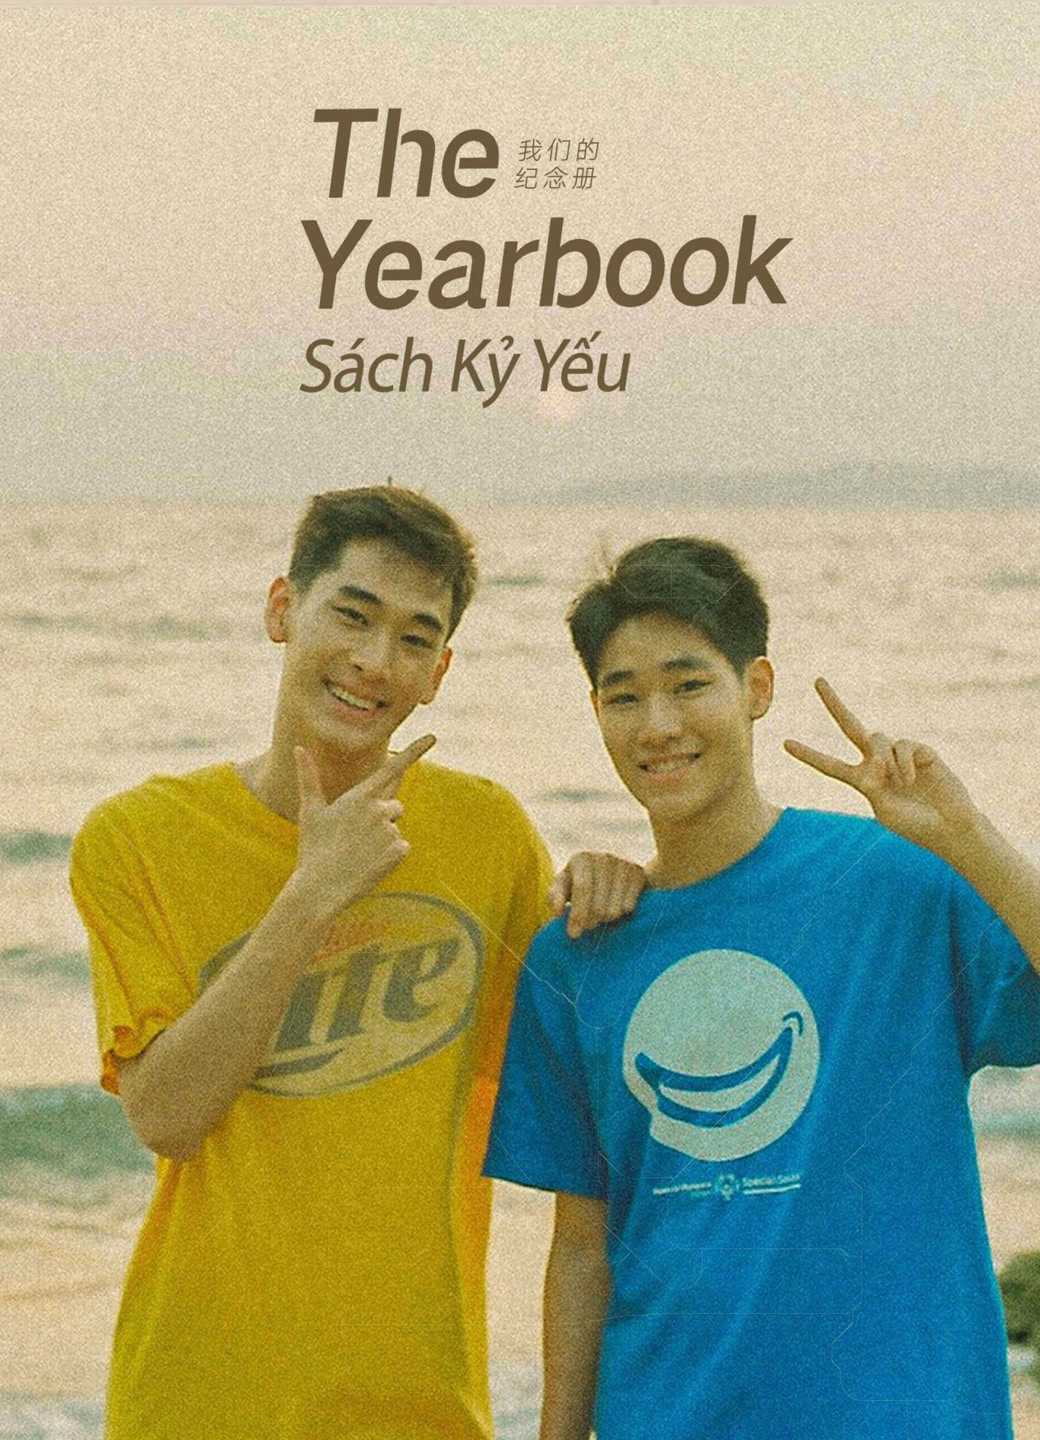 The yearbook: sách kỷ yếu - The yearbook the series